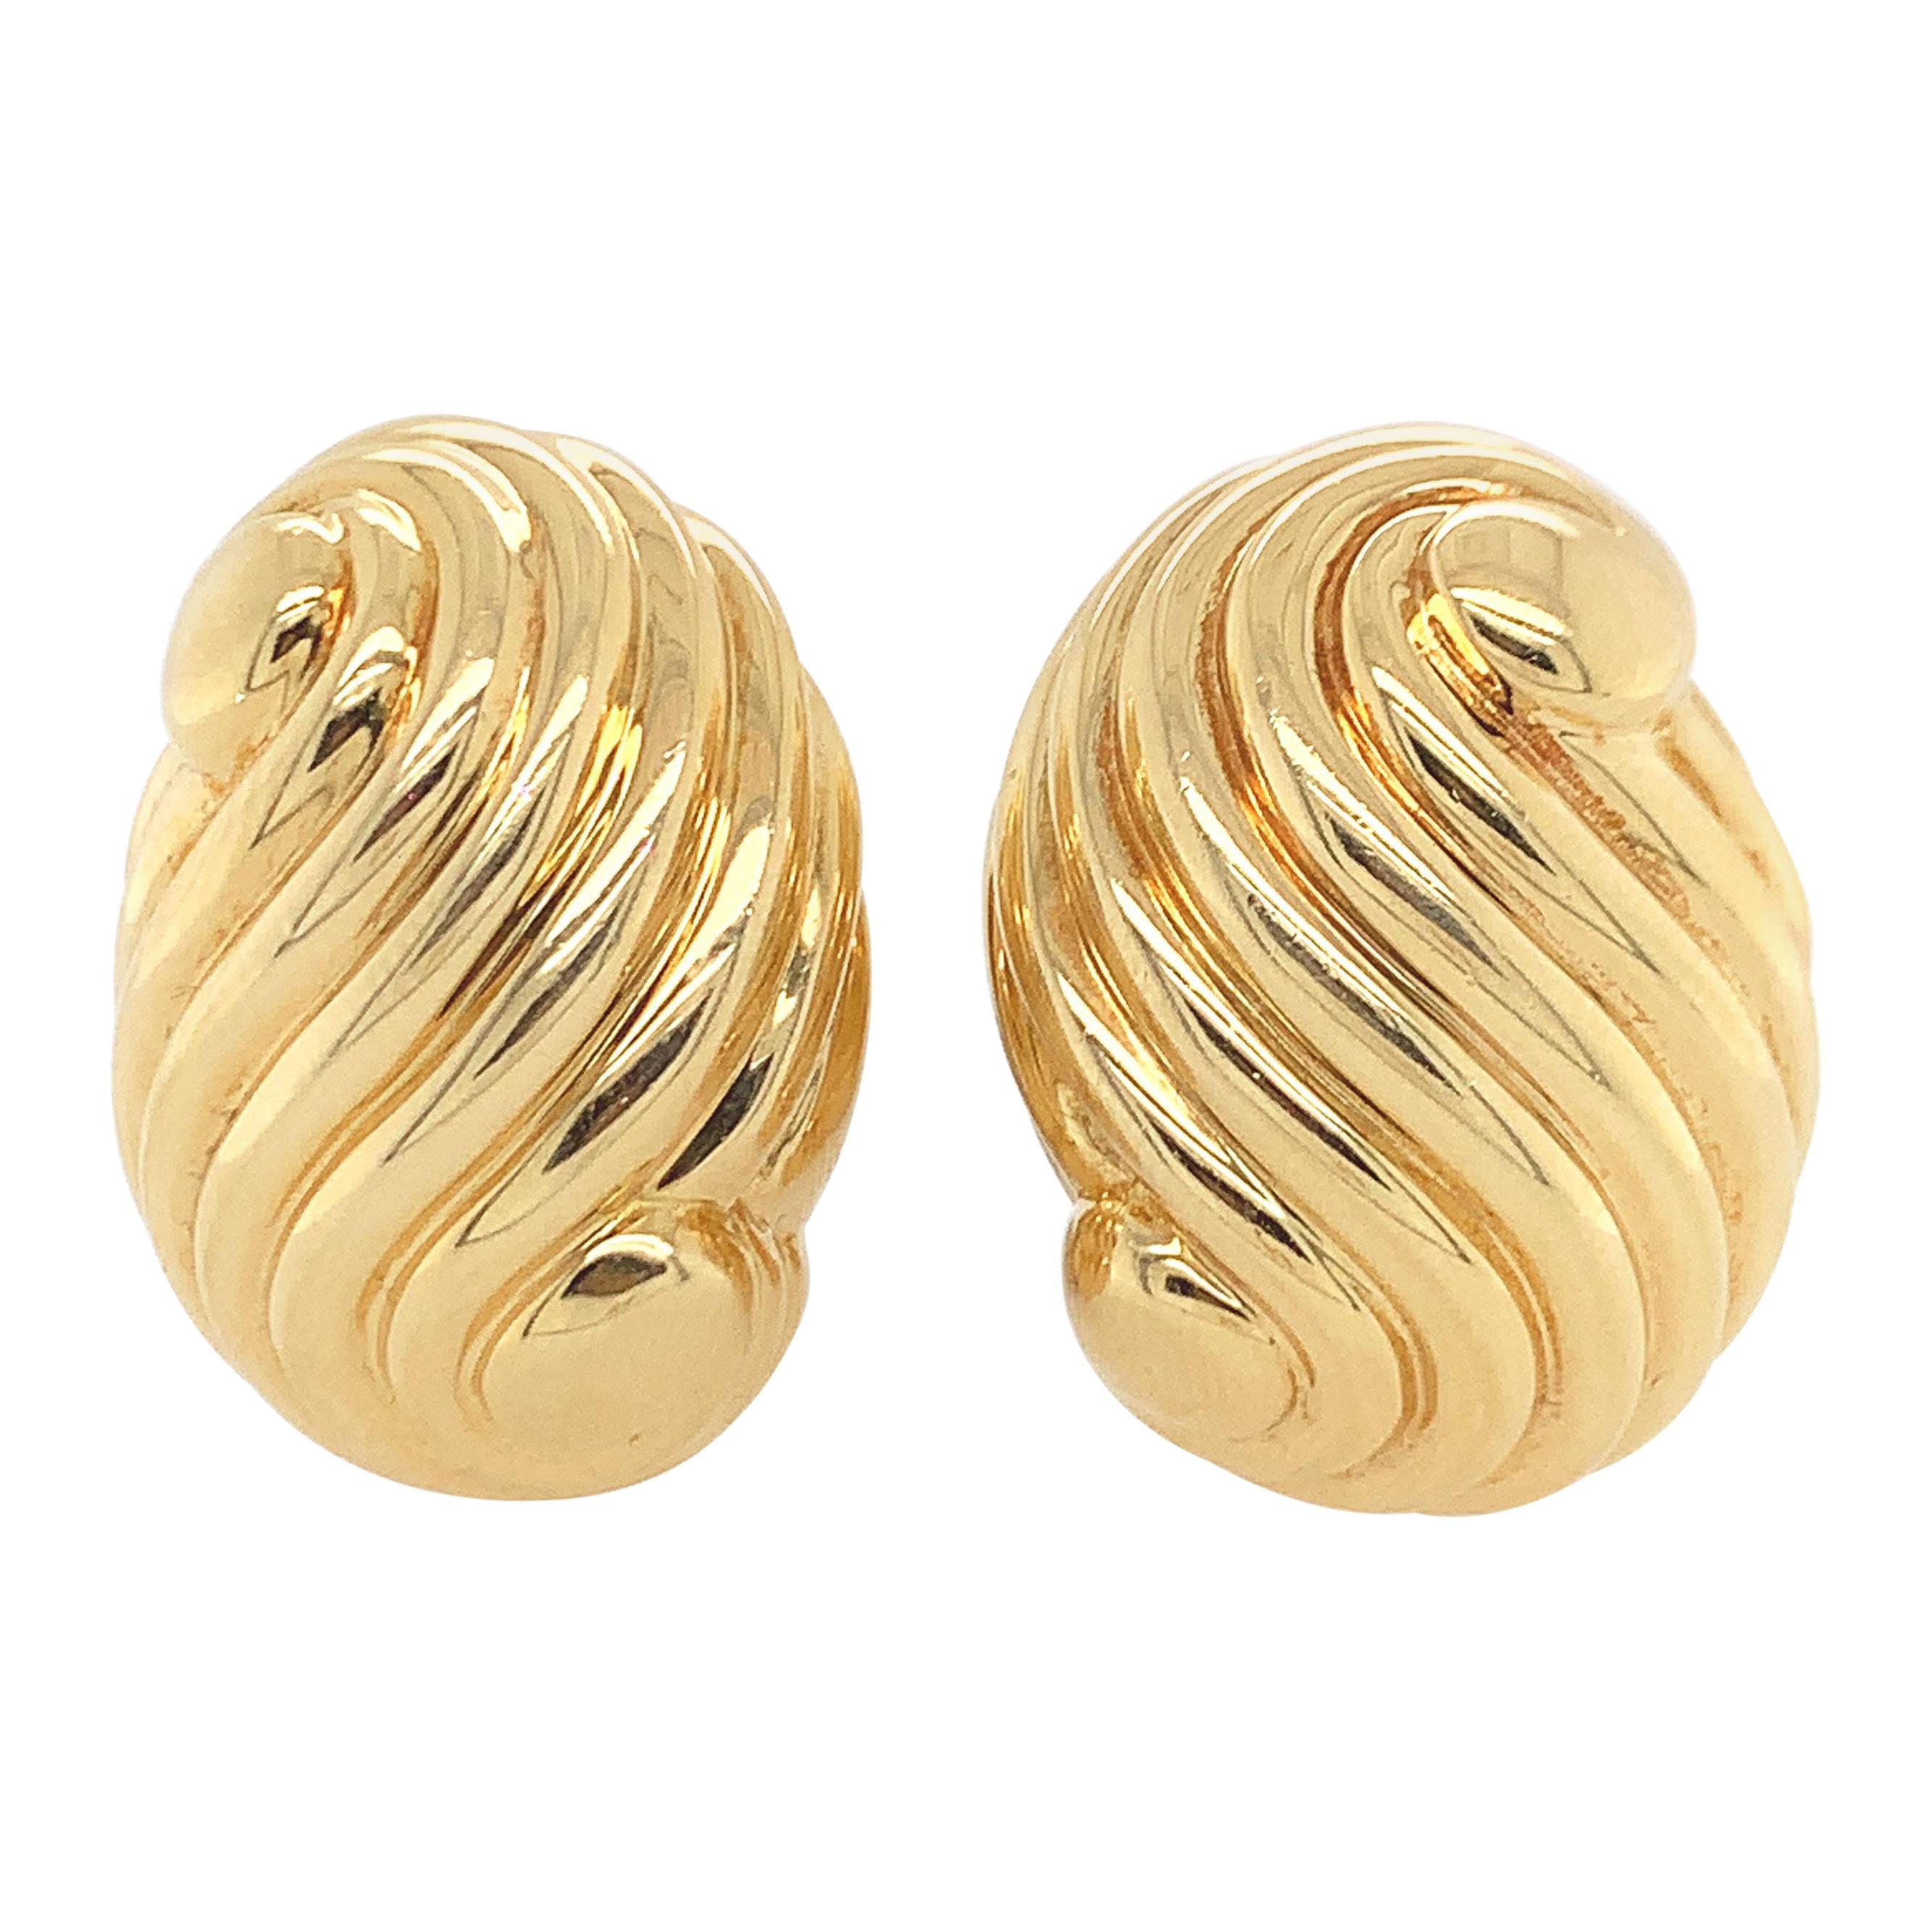 Webb Swril Gold Earclips For Sale